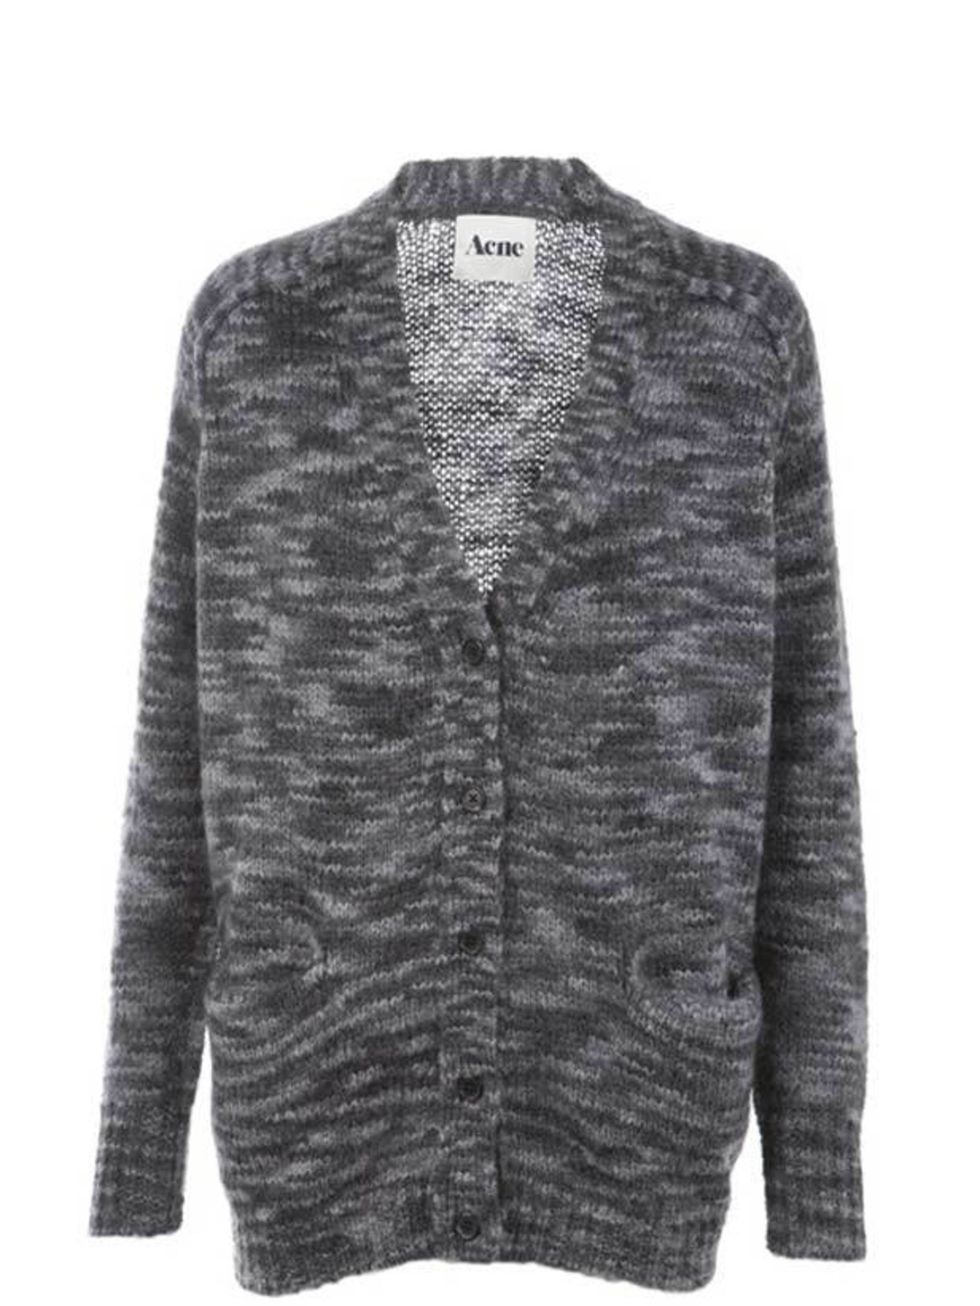 <p>Acne 'Beryl' cardigan, £209, available from <a href="http://www.seftonfashion.com/shopping/women/acne/item10051717.aspx">Sefton Boutique</a></p>